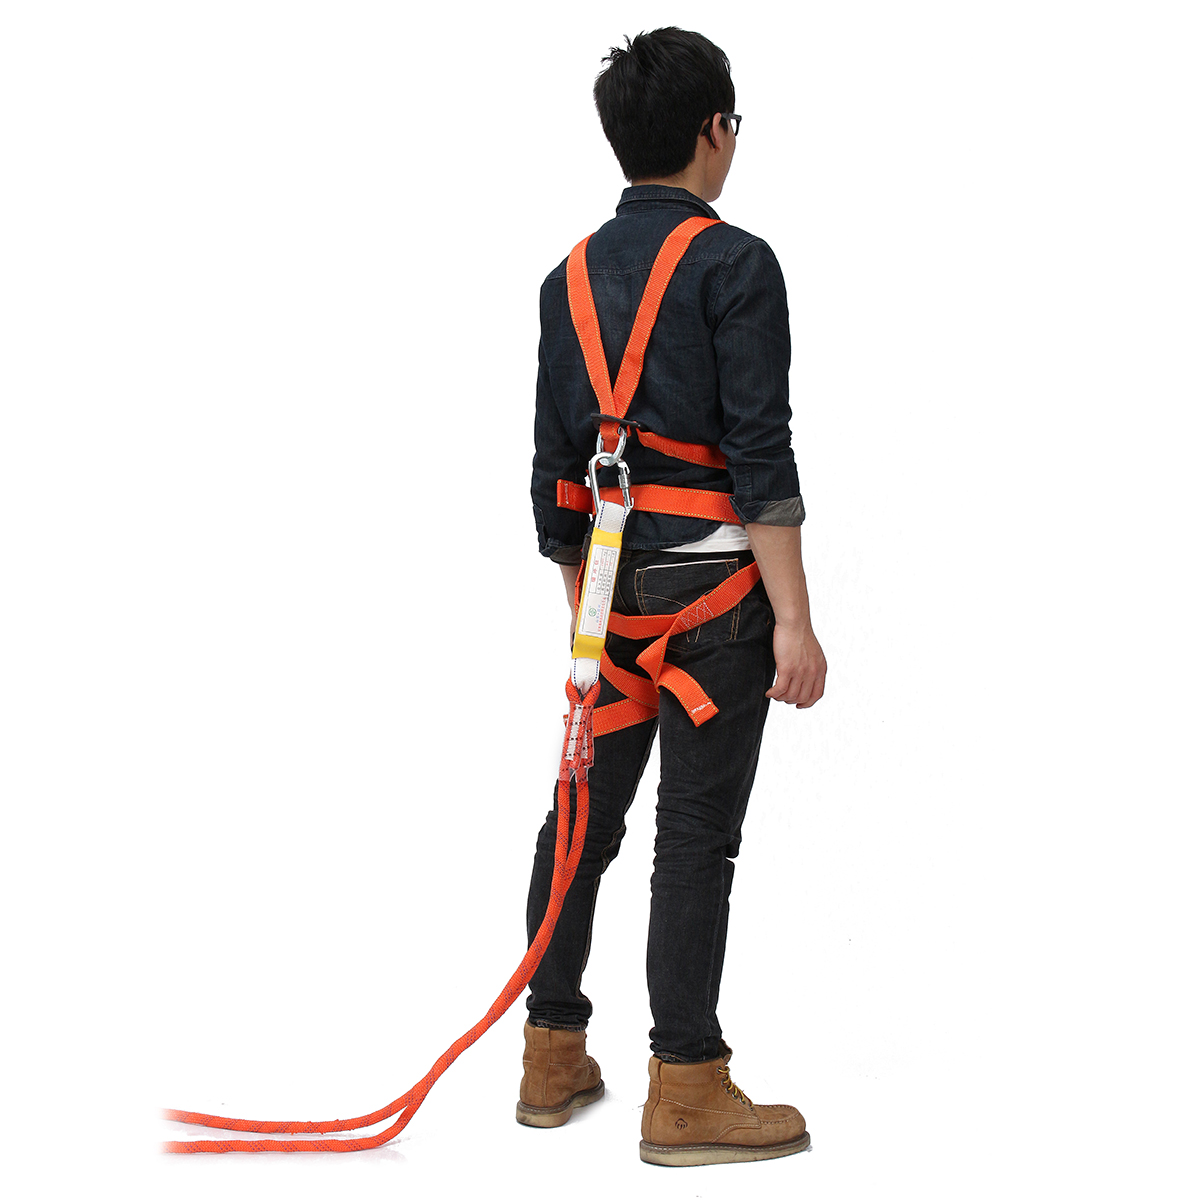 Outdoor-Full-Body-Climbing-Safety-Belt-Rescue-Rappelling-Aloft-Work-Suspension-Strap-Harness-1132532-9